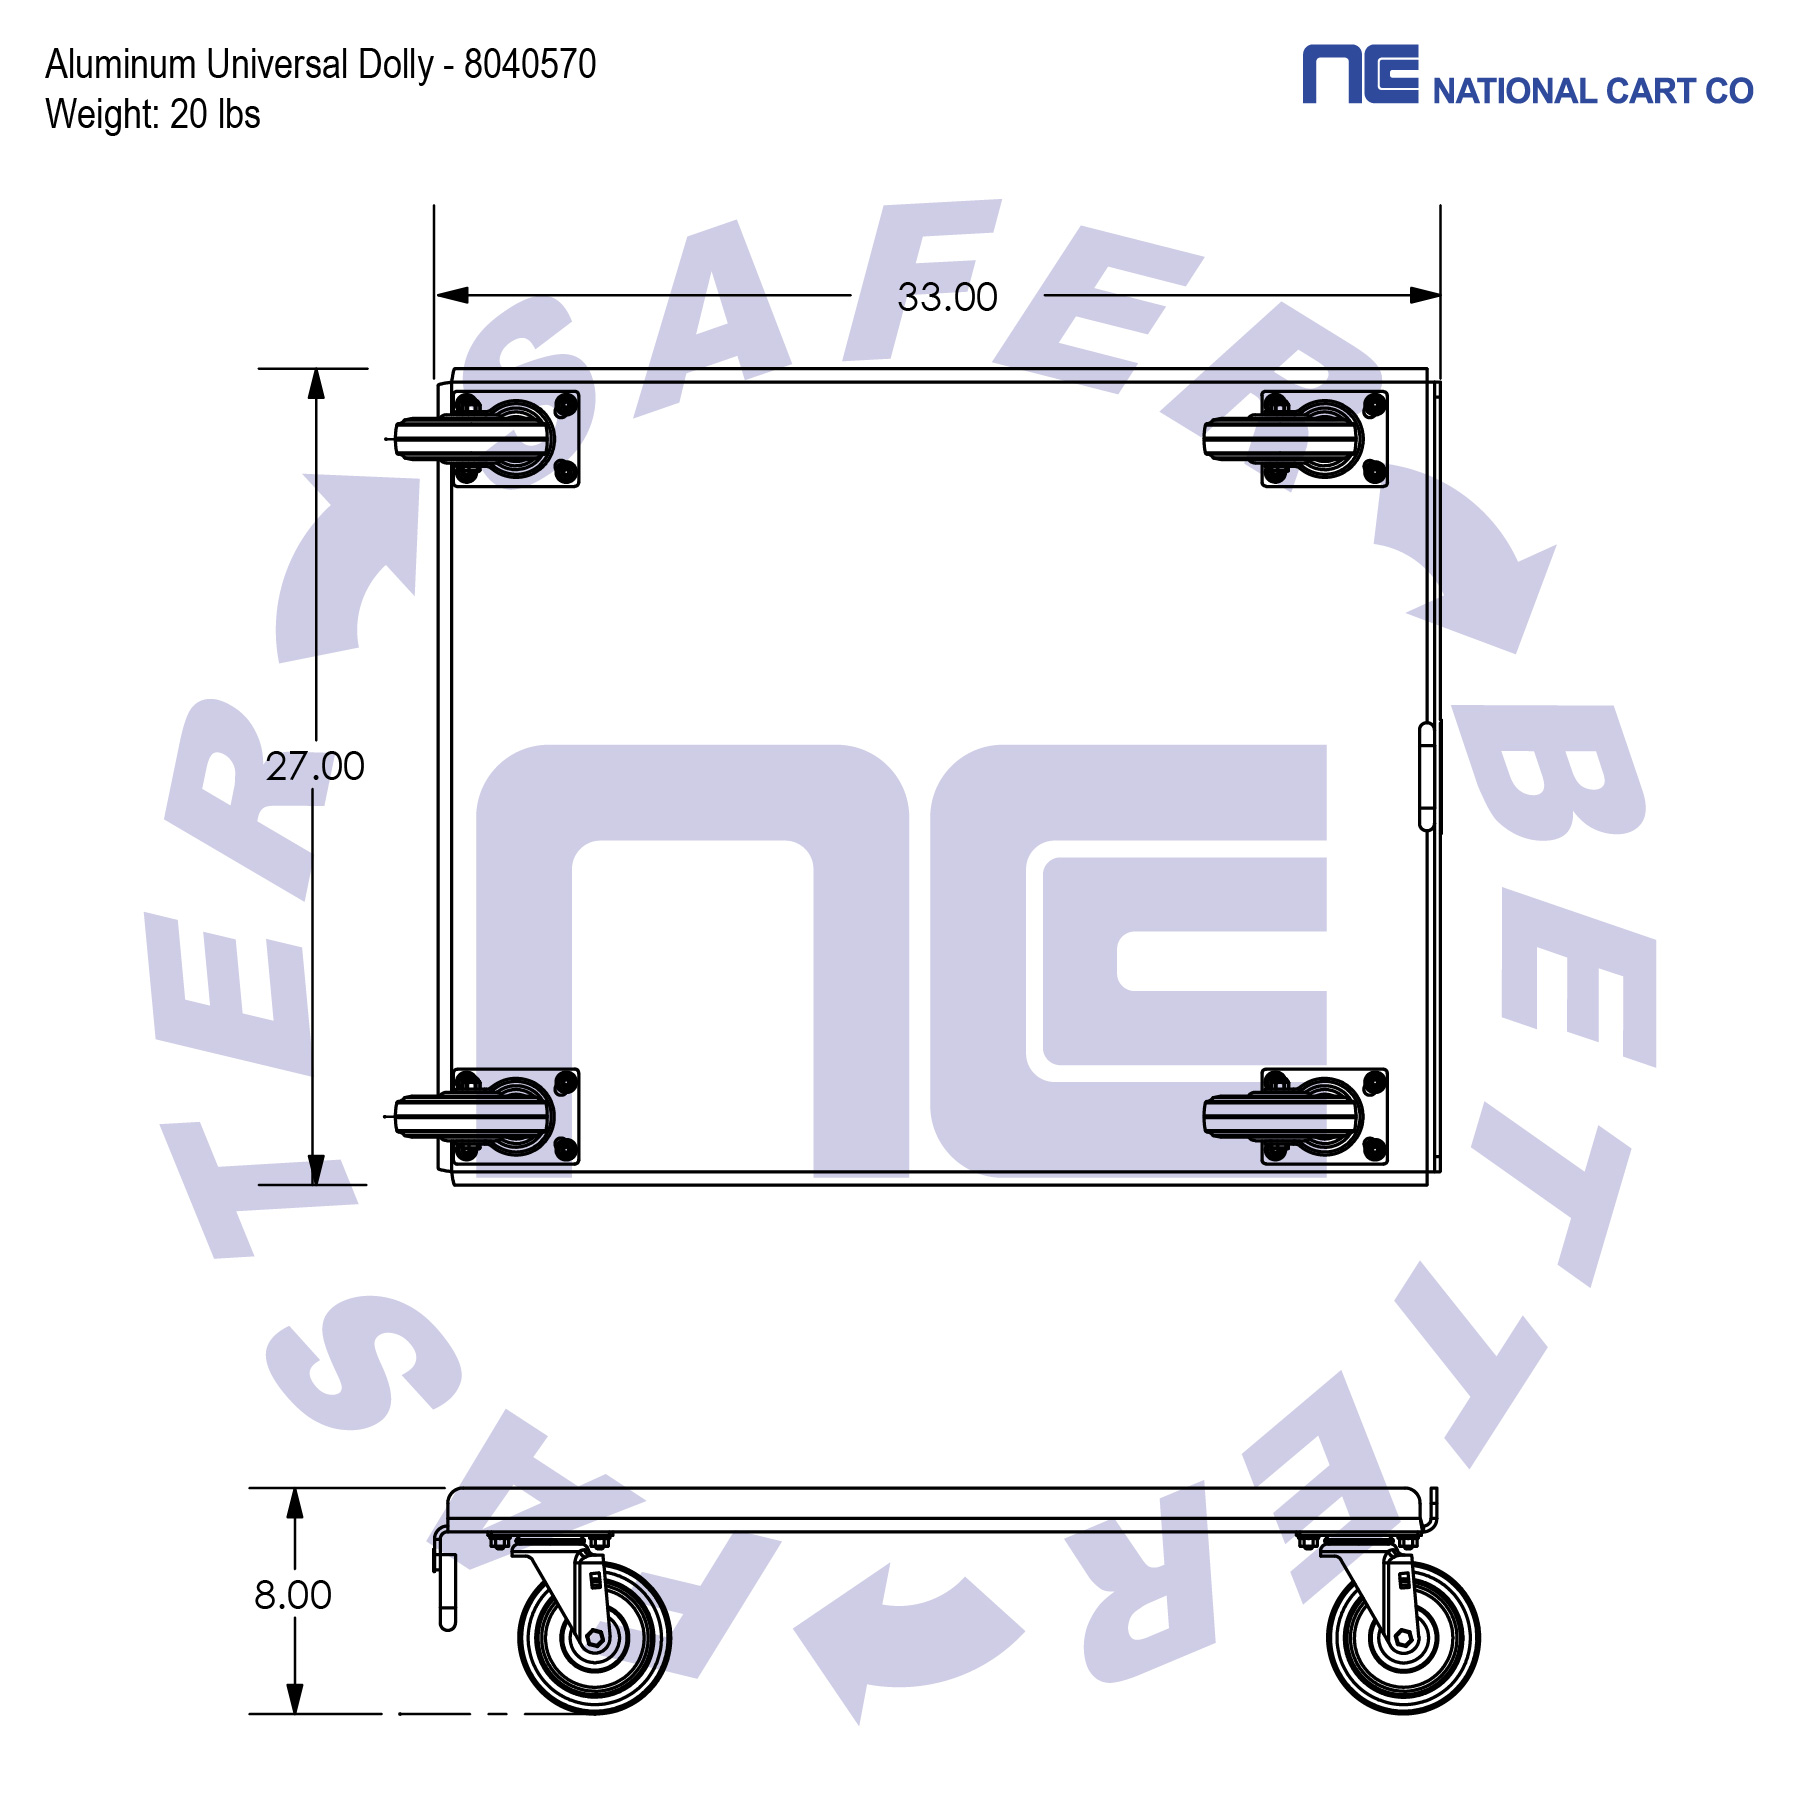 8040570 copy aluminum dolly udk copy NSF certified nest dollies industrial cart nesting picking cart NSF cart NSF rack NSF approved NSF certified National Sanitation Foundation tray shelf Distribution Cart picking cart tray shelf picking cart, picking cart, ecom cart, ecommerce cart, ecommerce picking cart, picking cart, INDUSTRIAL CARTS, grocery cart grocery picking cart, department store cart, beverage cart NSF approved. This food service cart meets strict standards and procedures imposed by NSF. lug cart meat department, produce department